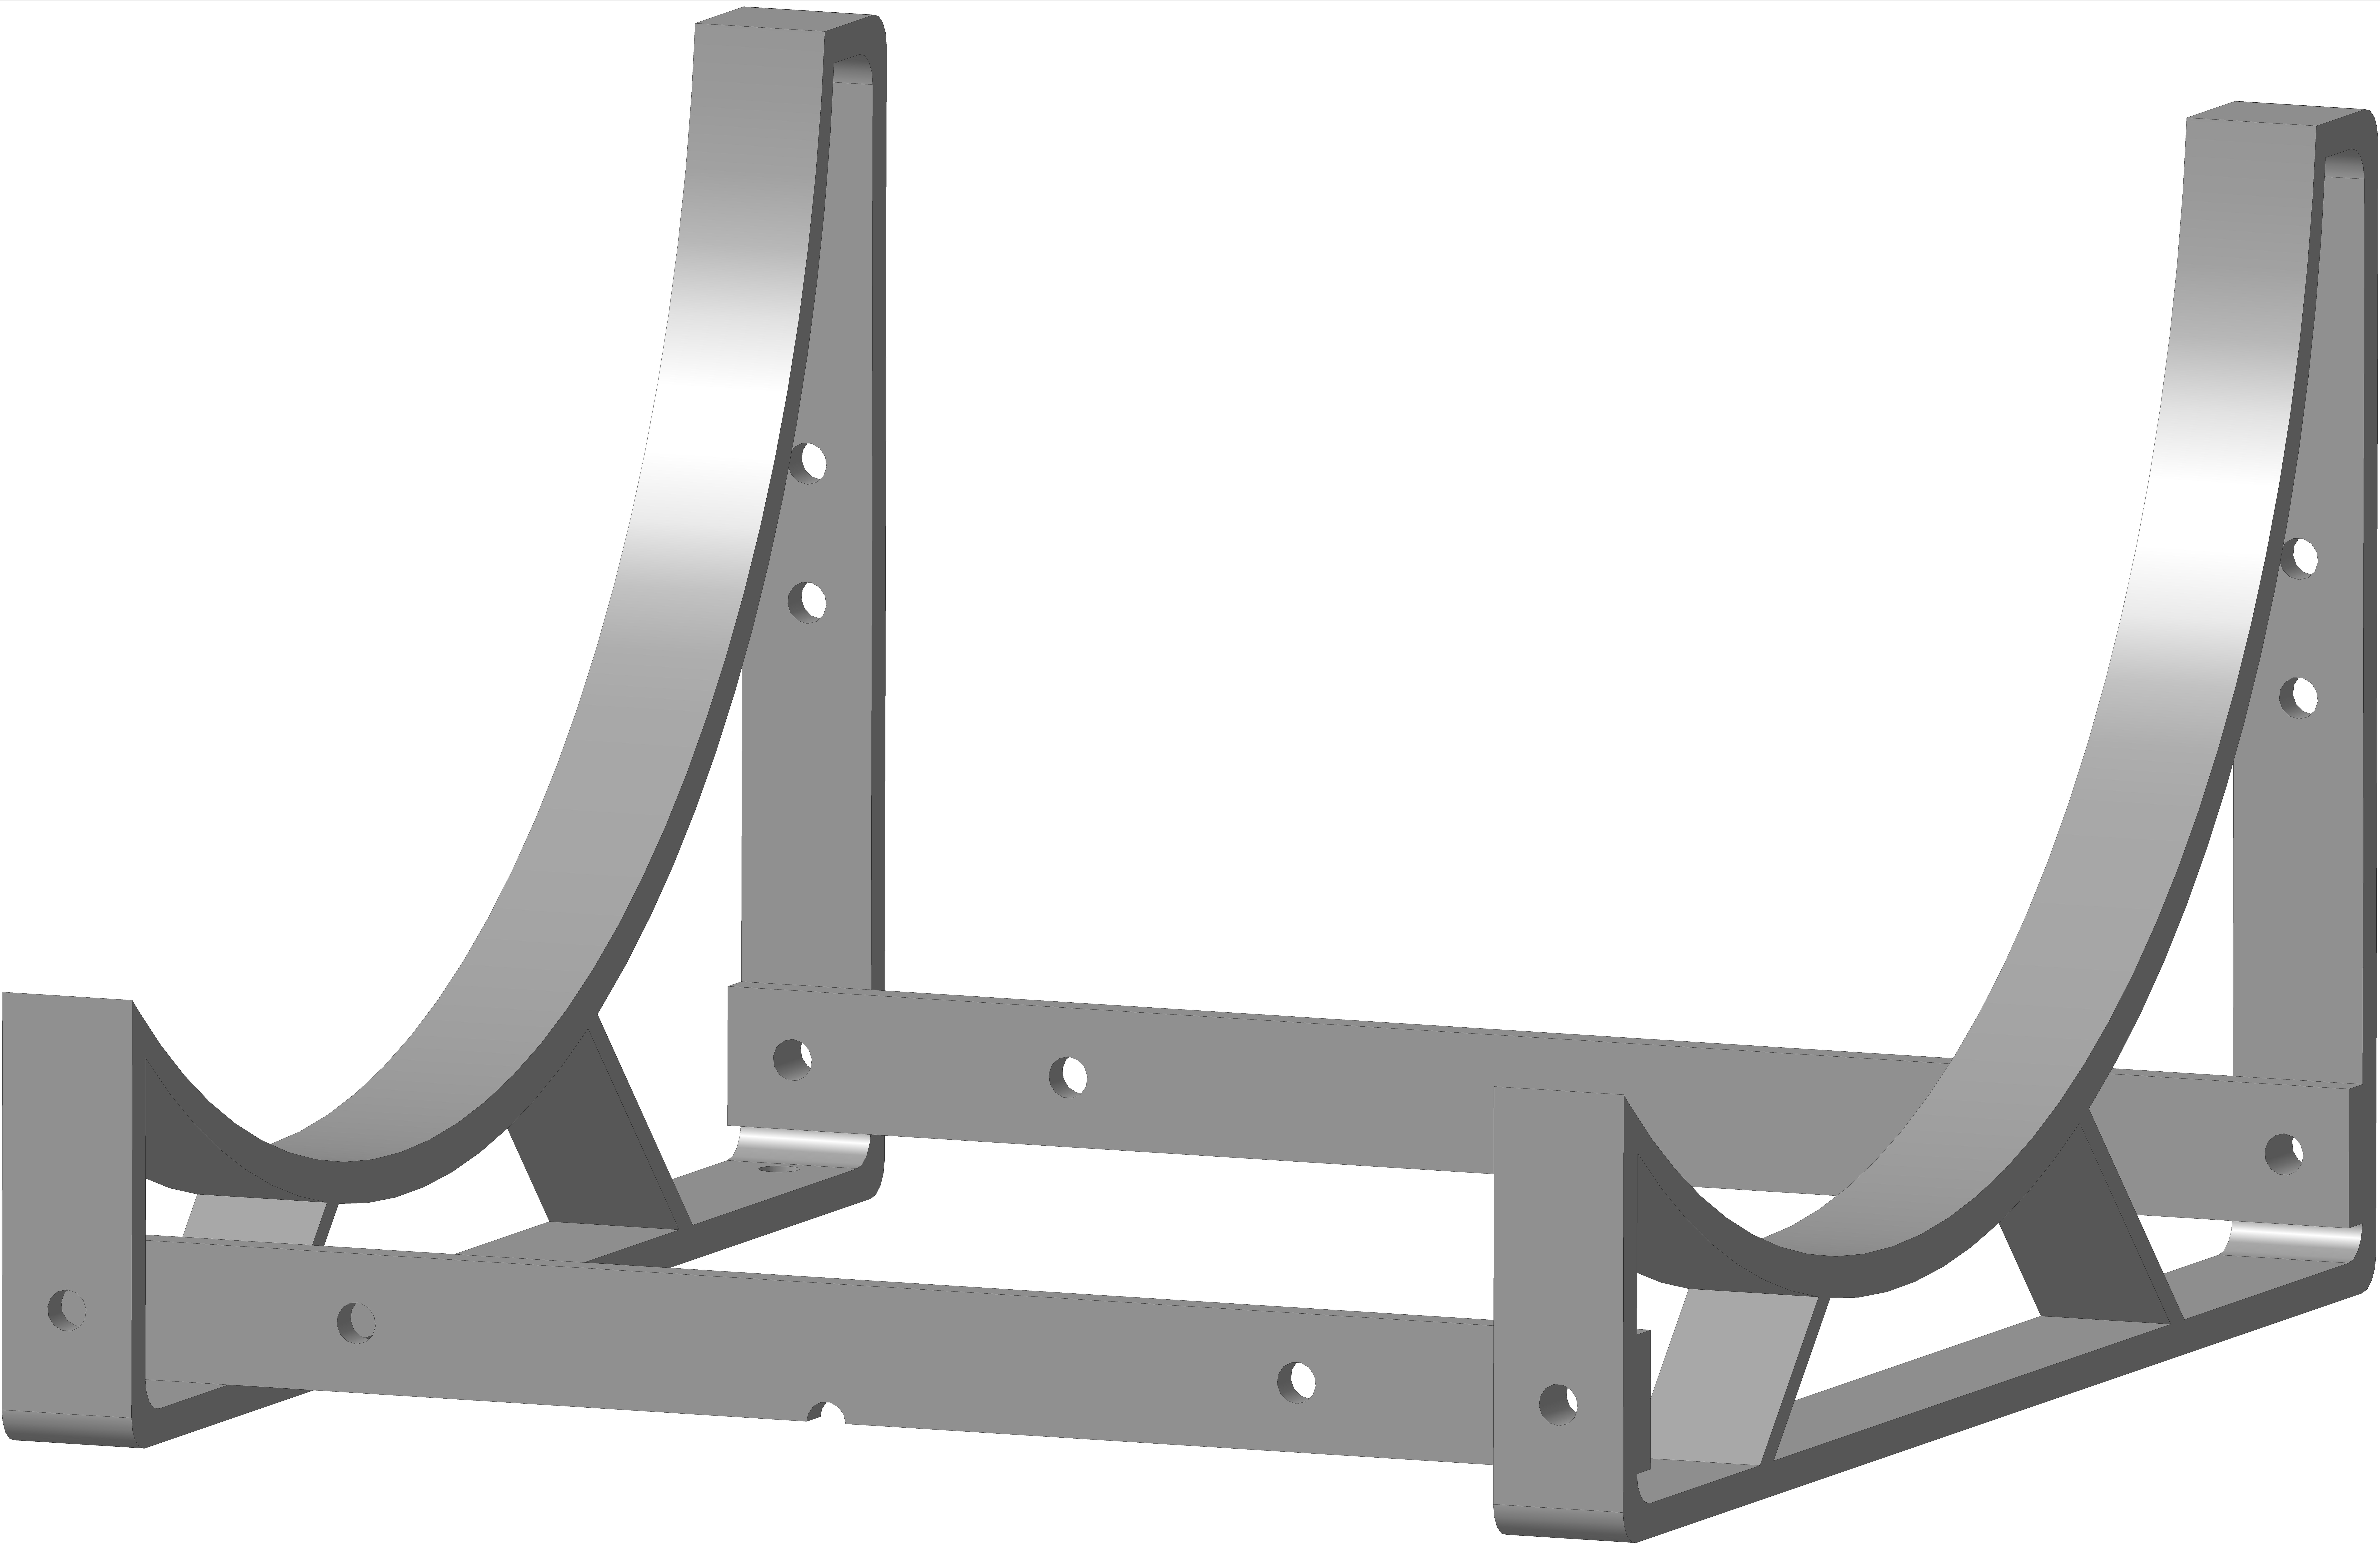 Galvanized deck cradle for 20-25DK drawing